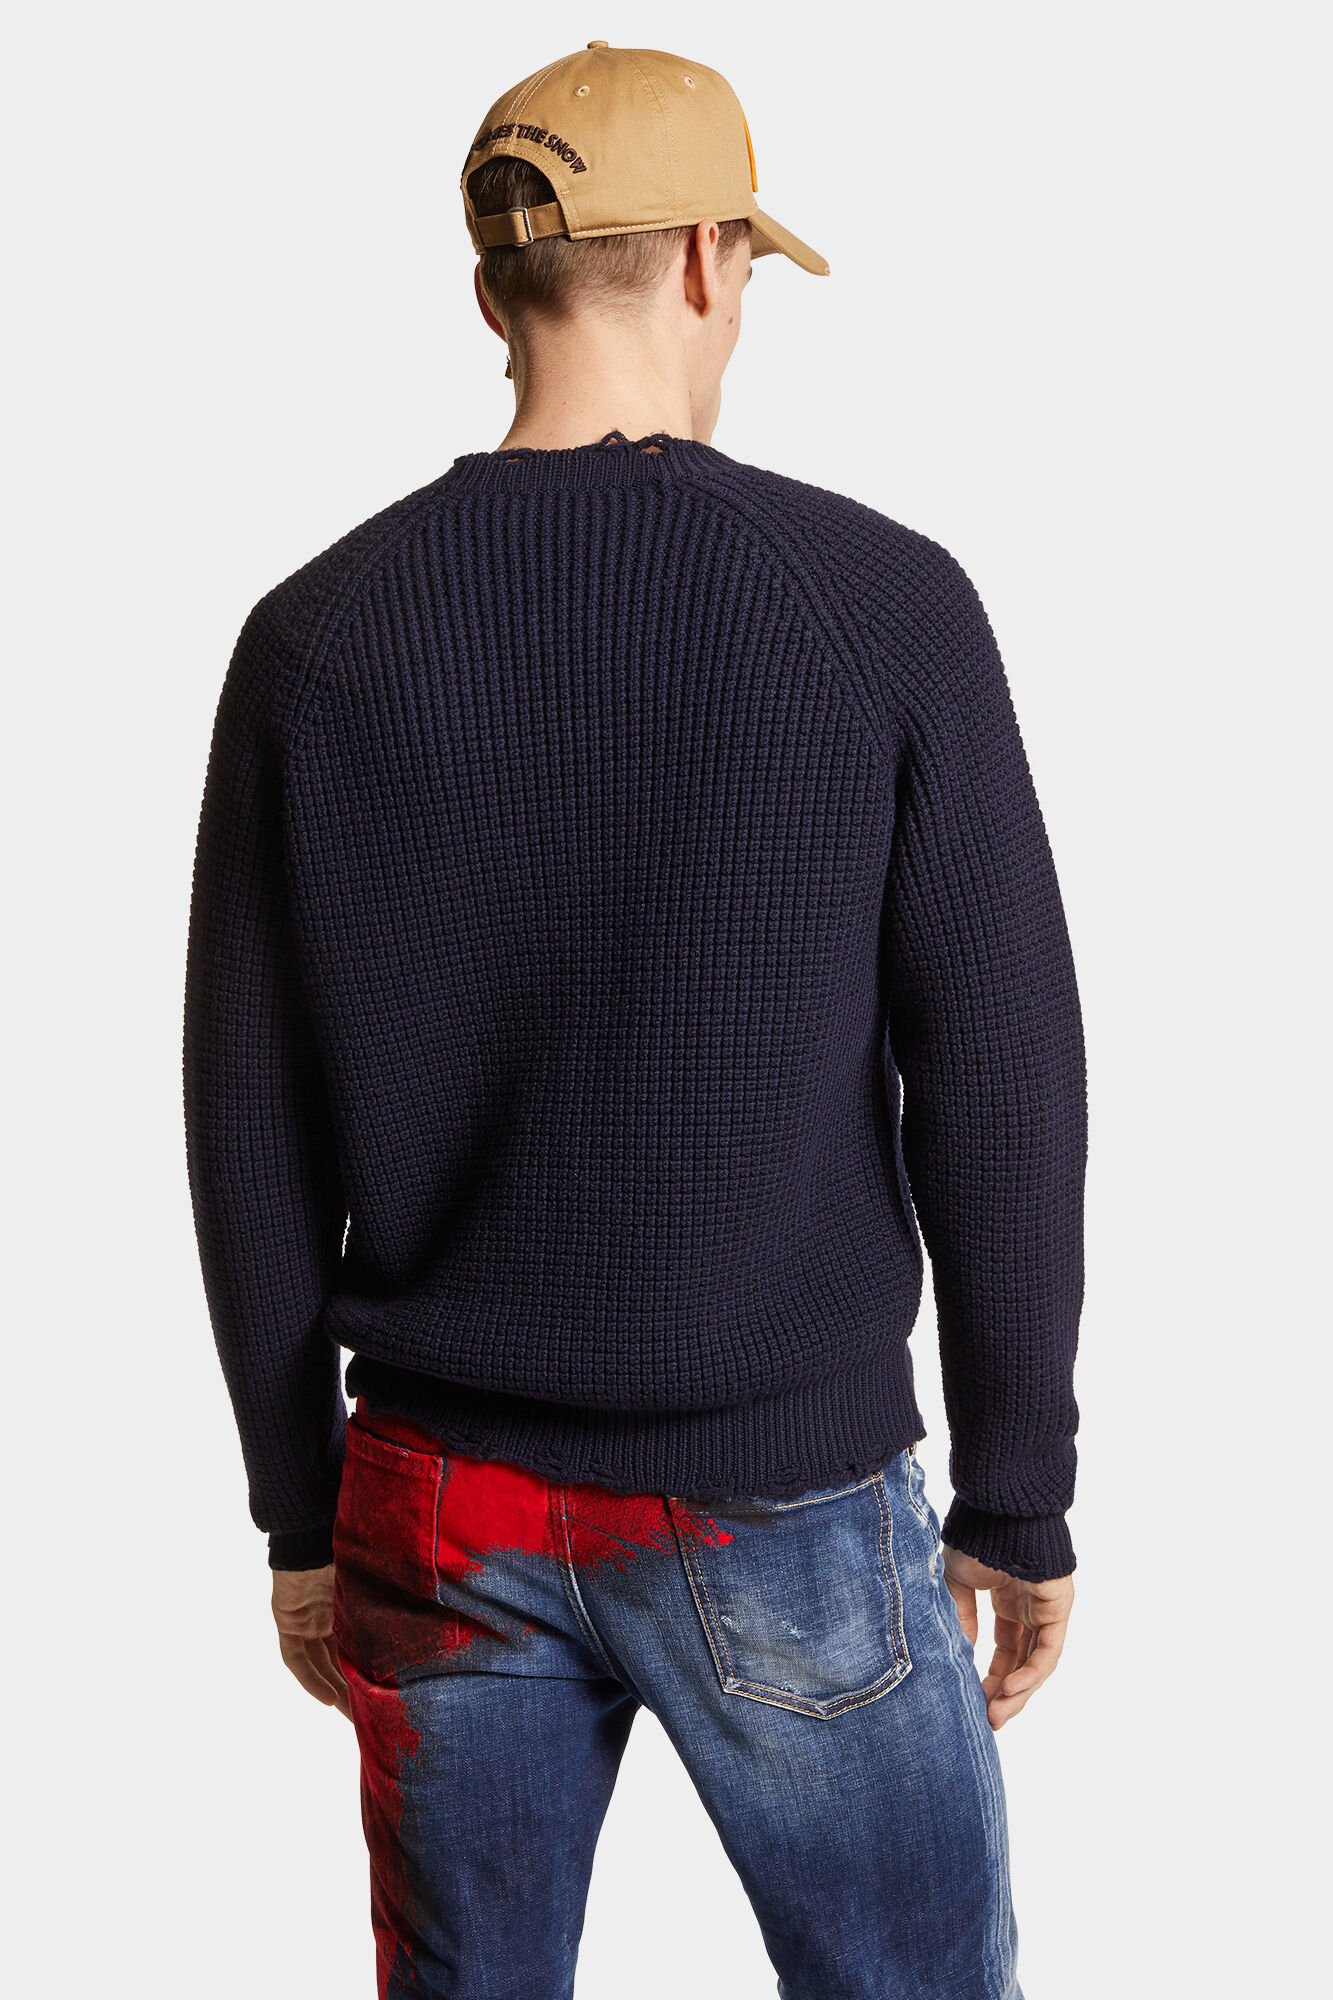 Men's Knitwear, Sweater, Turtleneck and Pullover | DSQUARED2